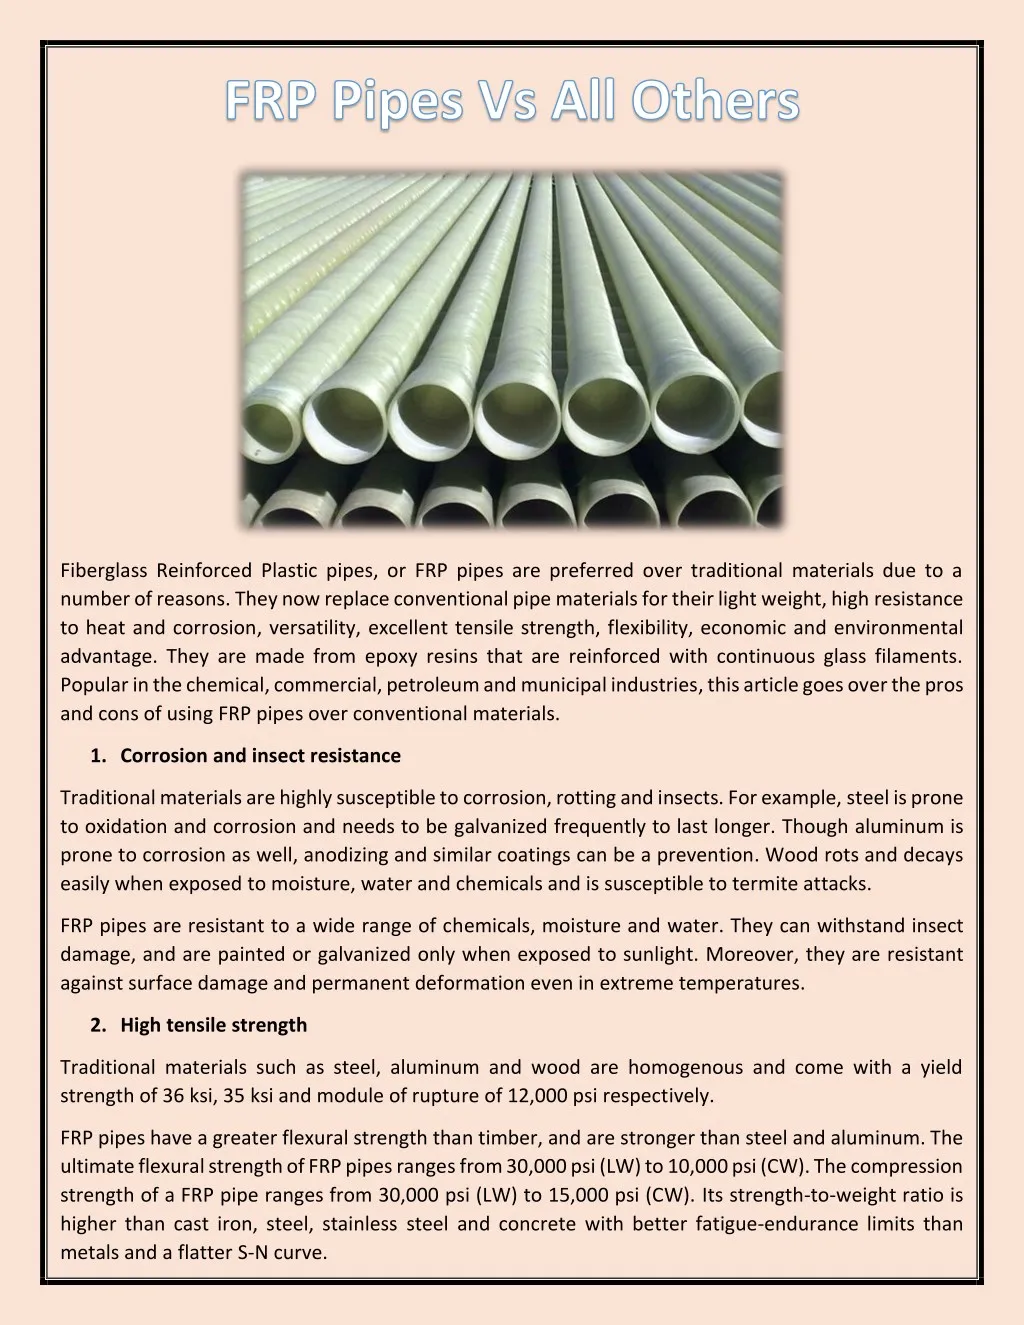 fiberglass reinforced plastic pipes or frp pipes